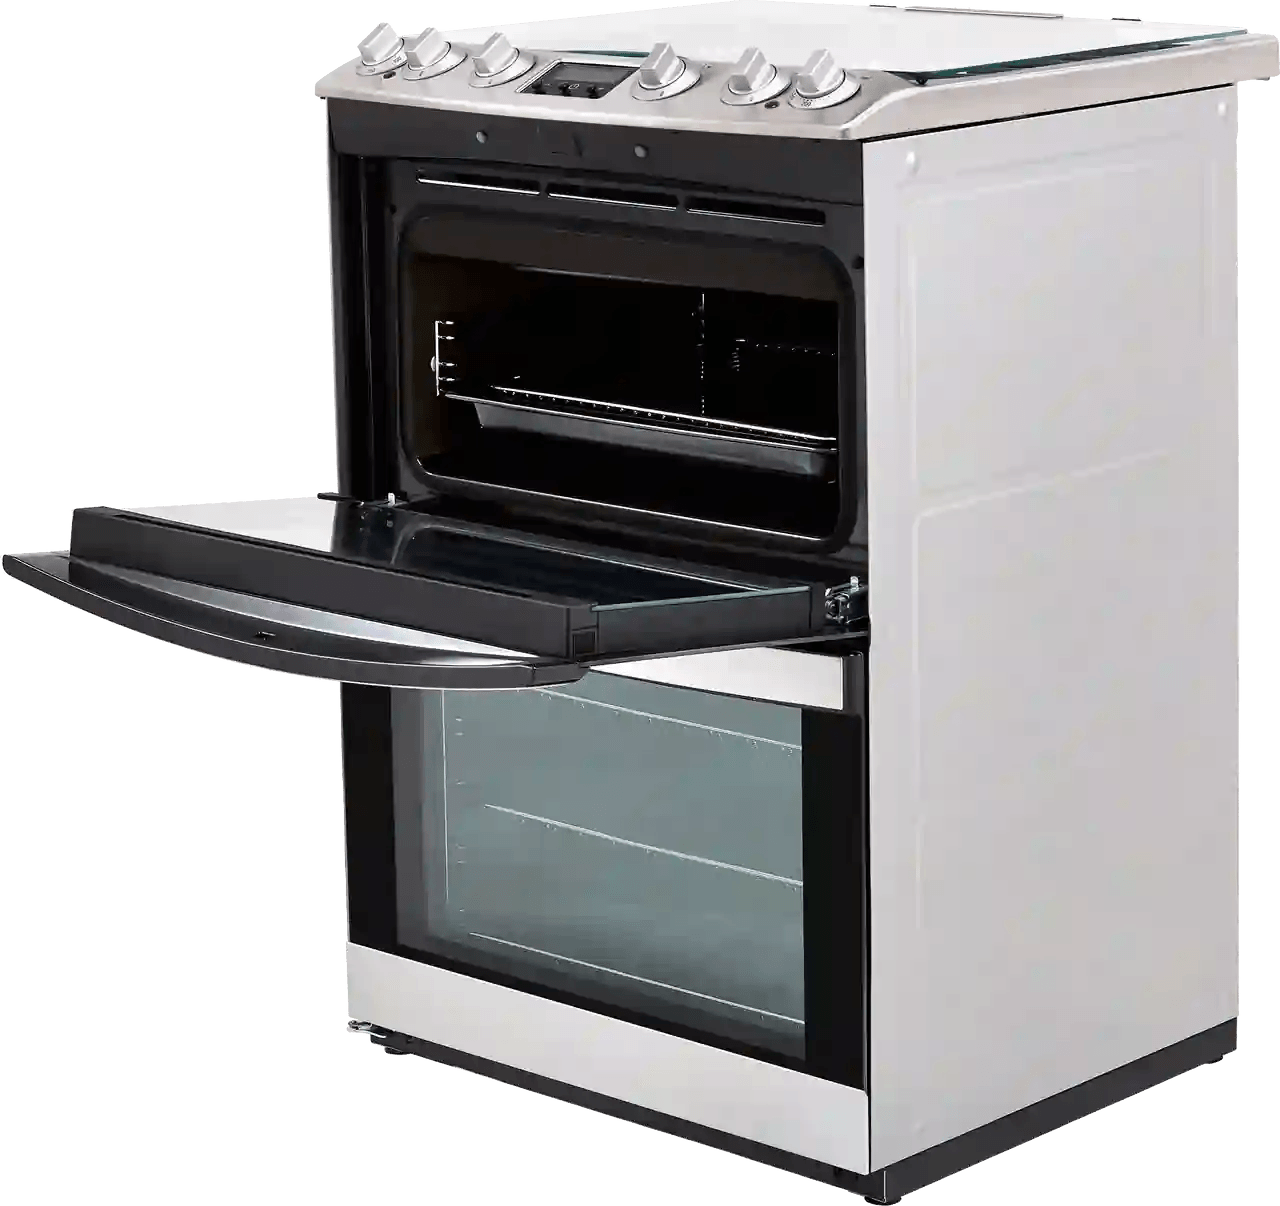 AEG CKB6540ACM 60cm Dual Fuel Cooker with Double Oven Black/Stainless Steel - Atlantic Electrics